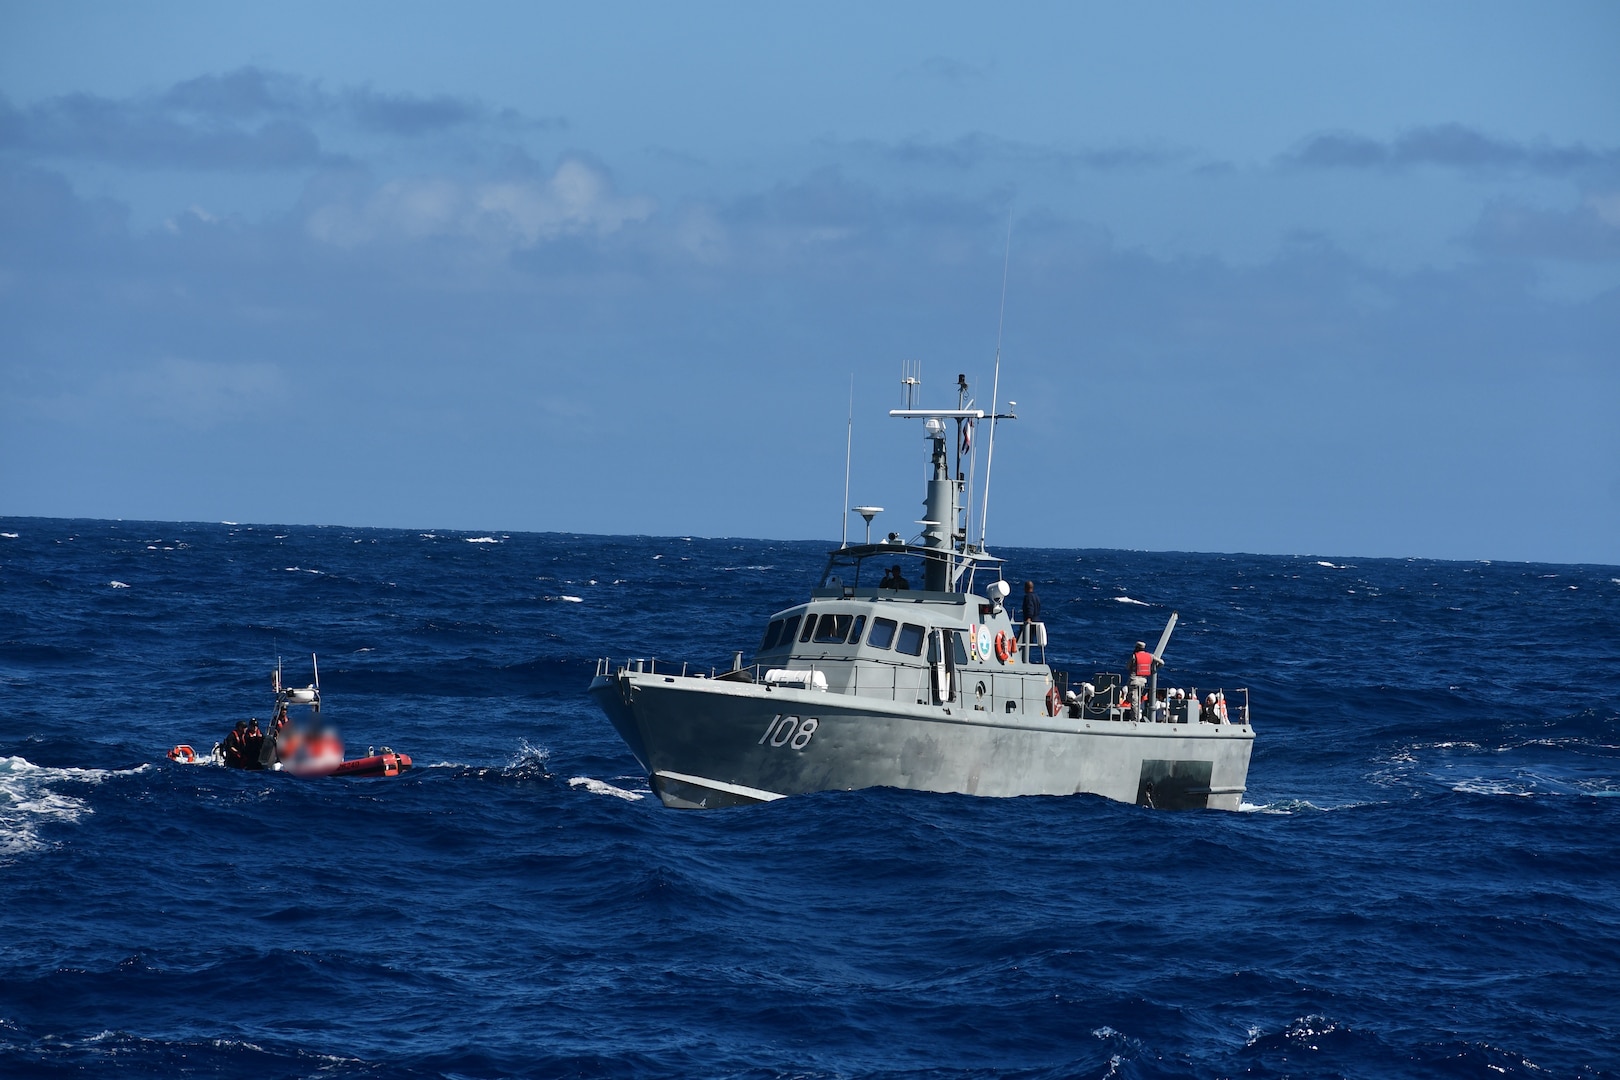 Coast Guard Cutter Joseph Napier’s small boat rendezvous with a Dominican Republic Navy vessel during the repatriation of 53 migrants to Dominican Republic, Jan. 12, 2023.  The migrant group was interdicted in the Mona Passage by Puerto Rico Police marine units, the Coast Guard Cutter Joseph Napier and a U.S. Customs and Border Protection multi-role enforcement aircraft the night of Jan. 10, 2024 near Cabo Rojo, Puerto Rico. (U.S. Coast Guard photo)